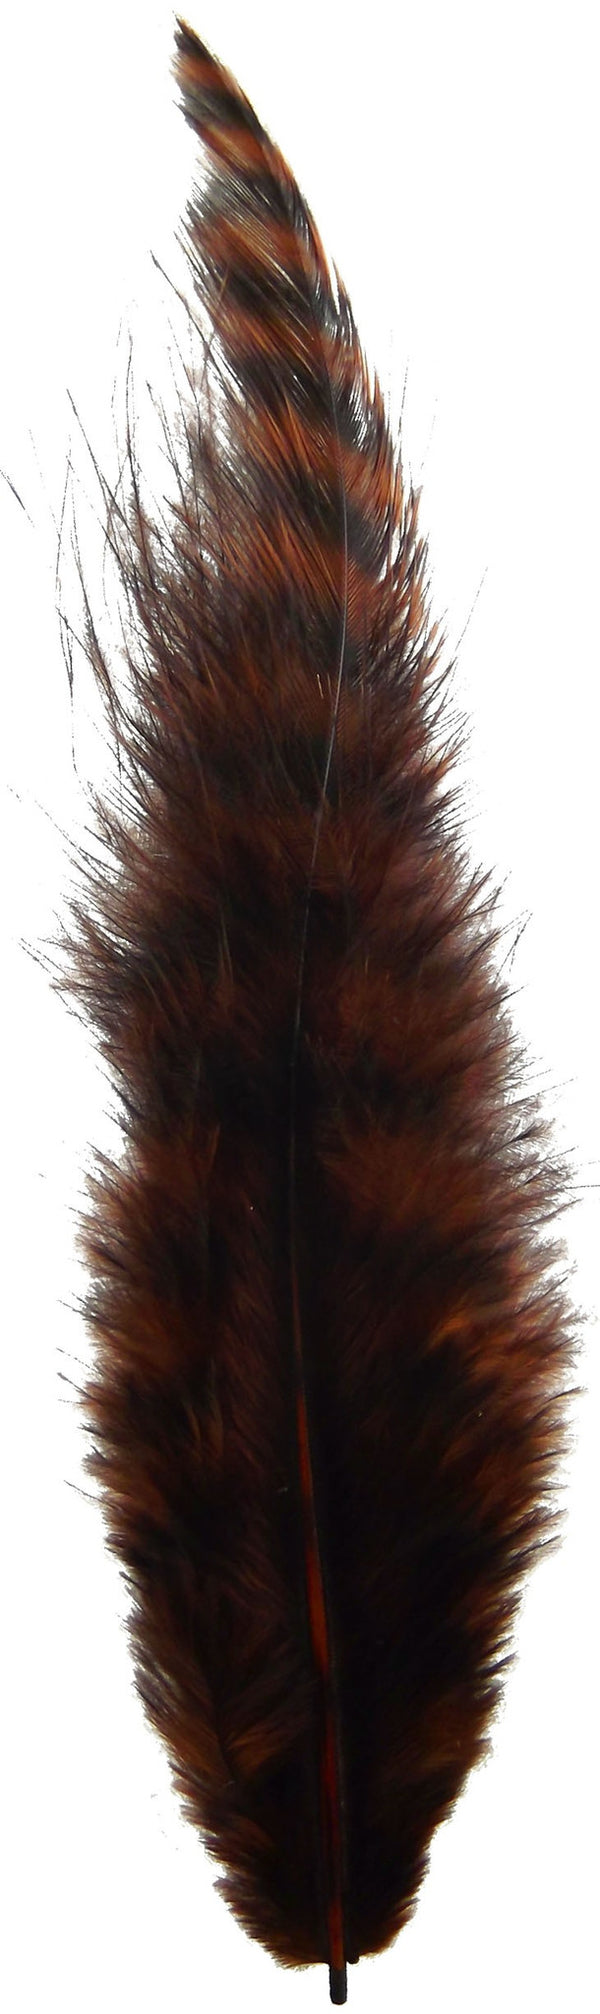 Spirit River UV2 Grizzly Soft Hackle - Fly and Field Outfitters - Online Flyfishing Shop - 9